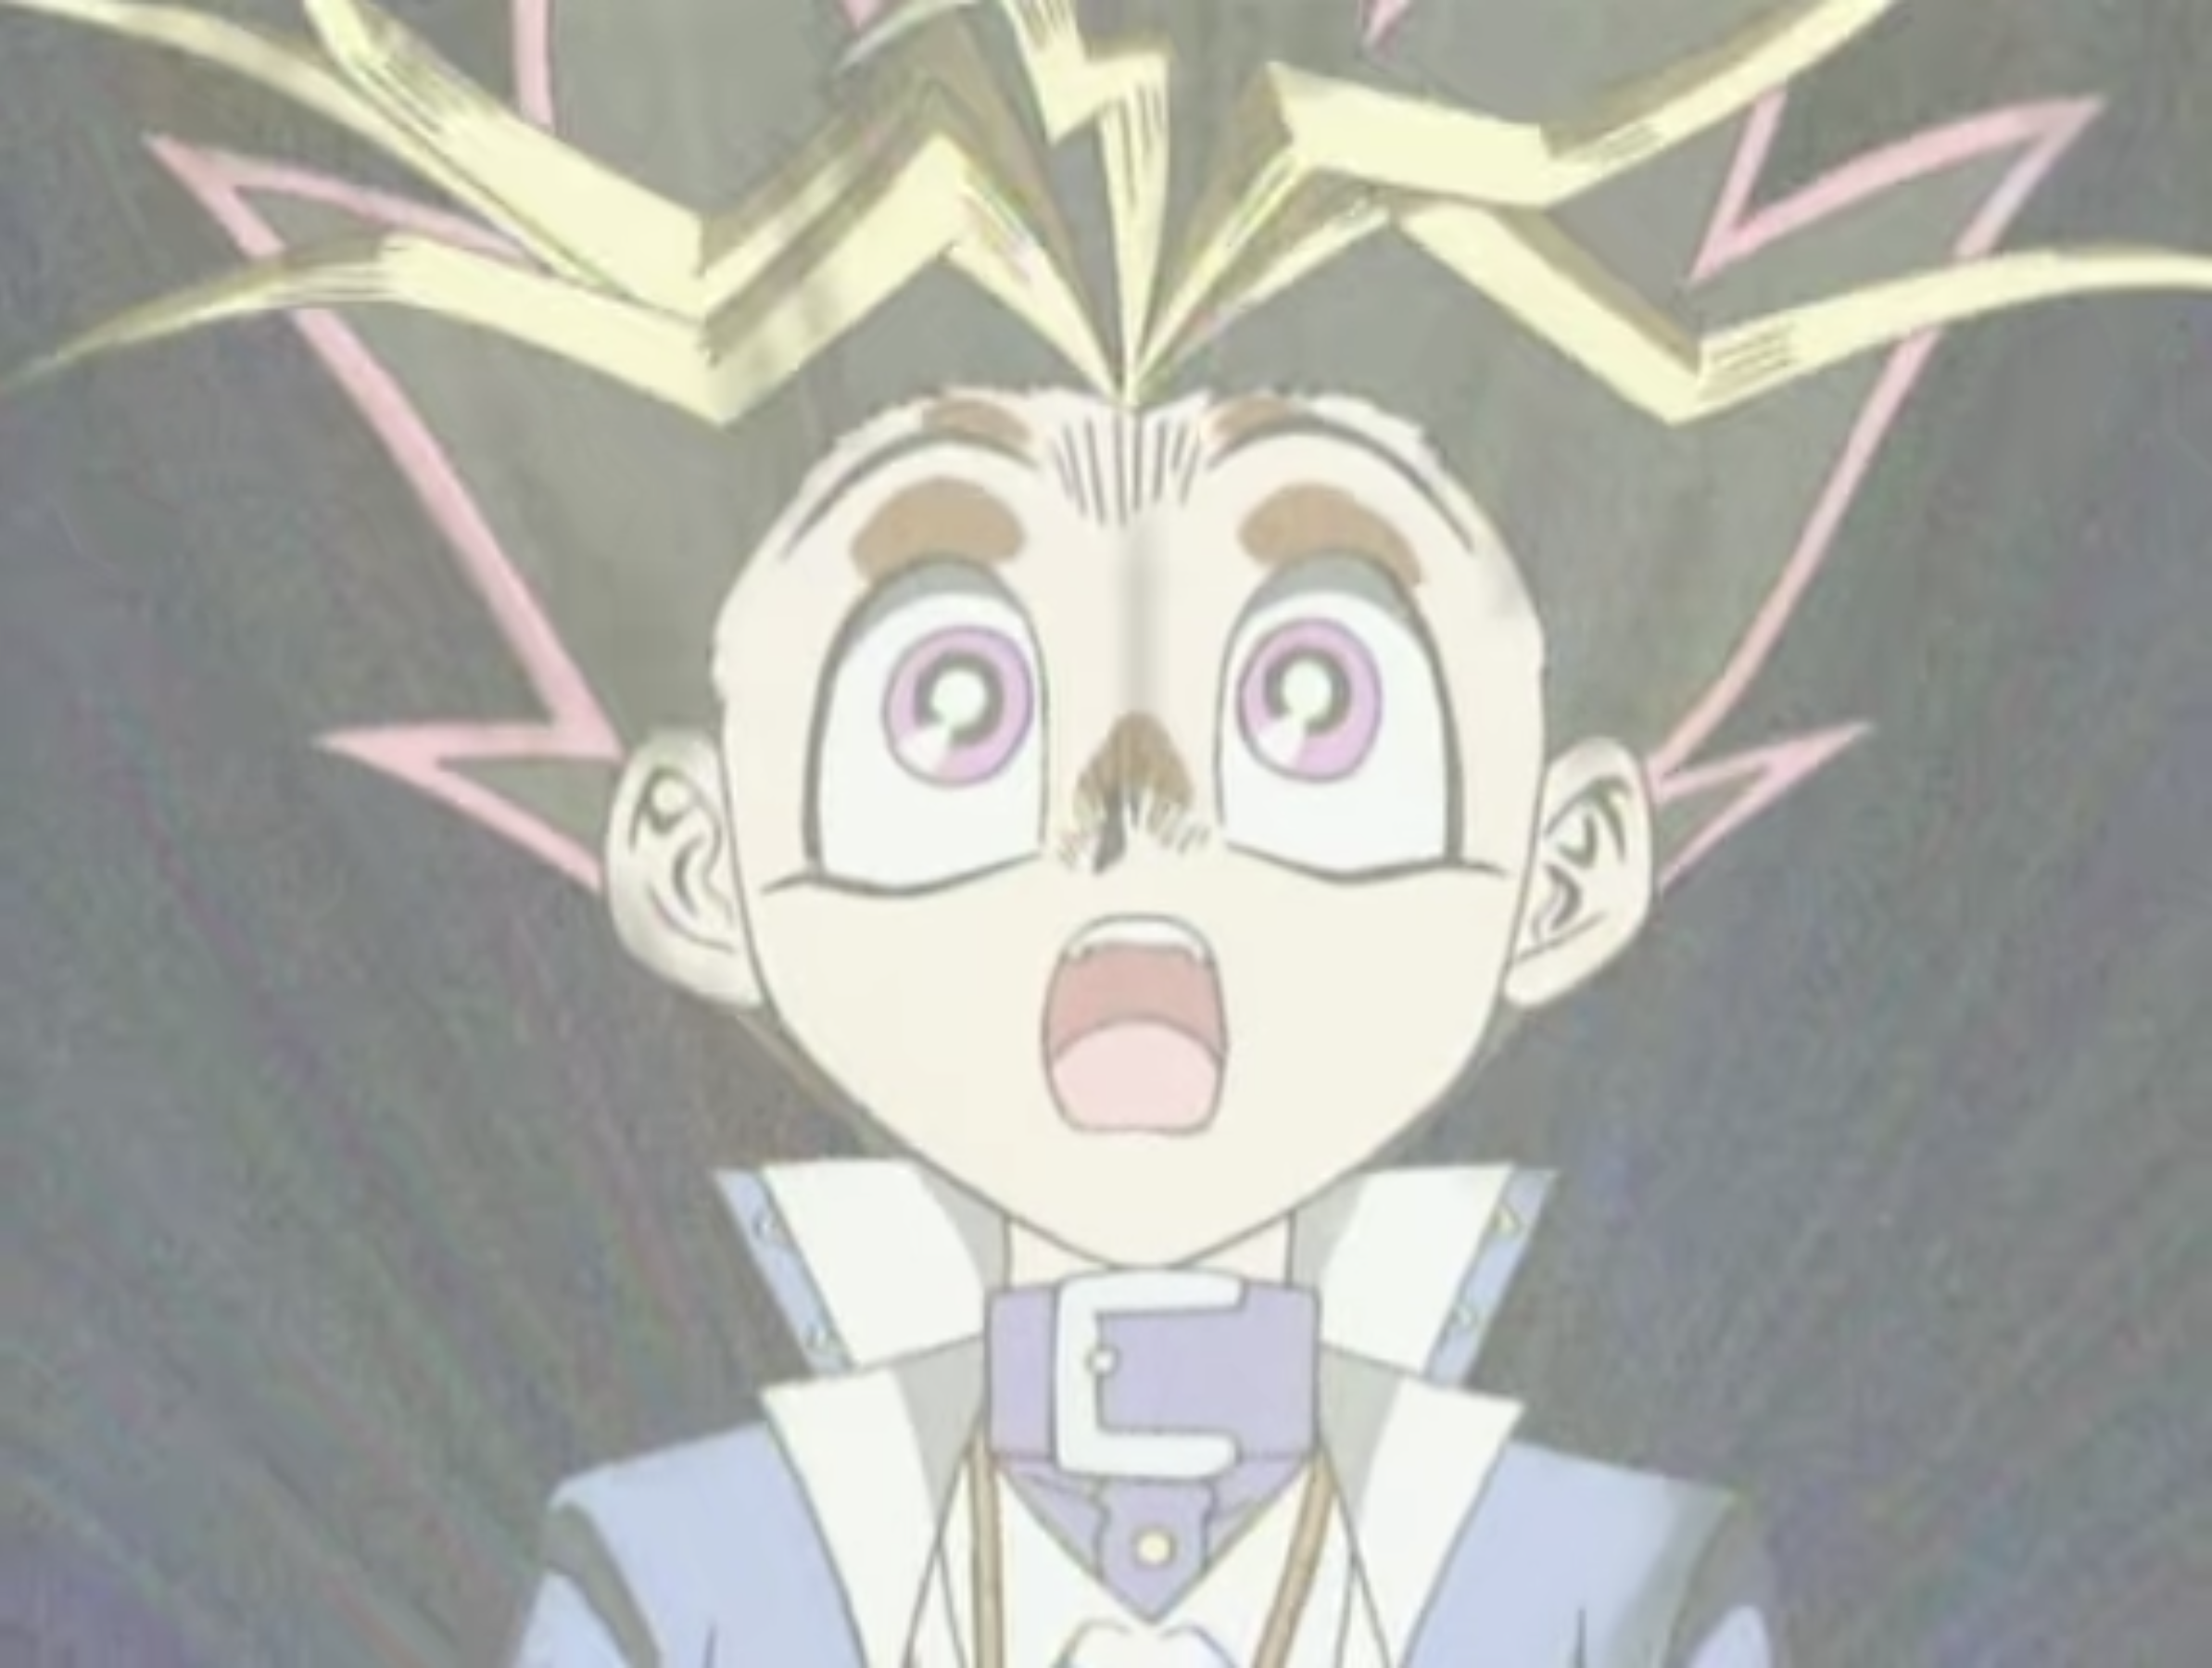 Yugi being possessed by the spirit of an ancient Egyptian spirit